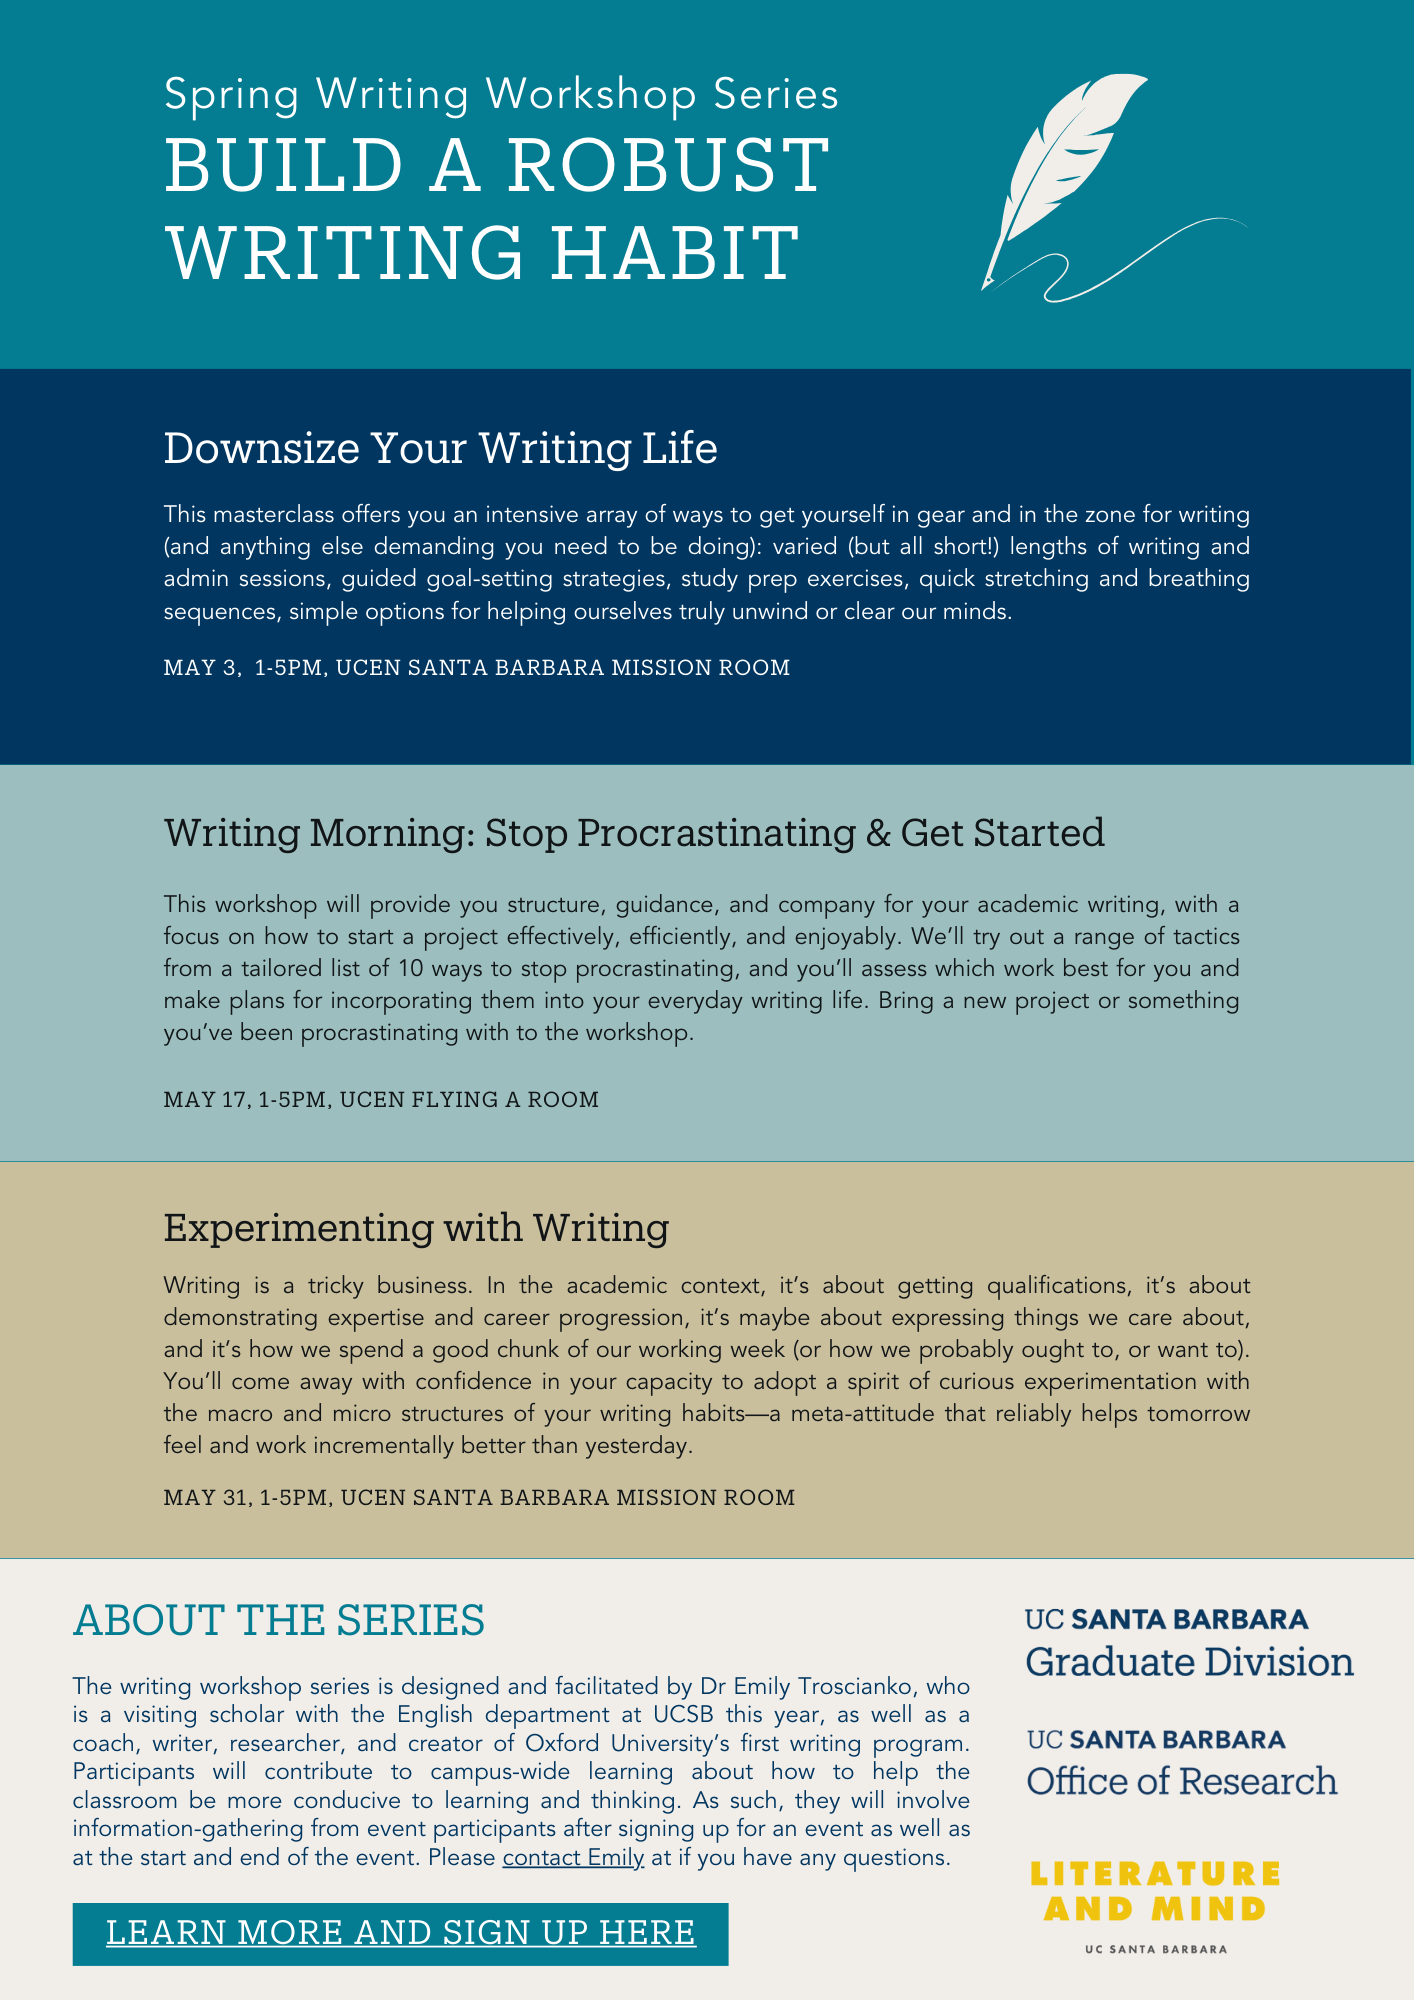 Build a Robust Writing Habit flyer